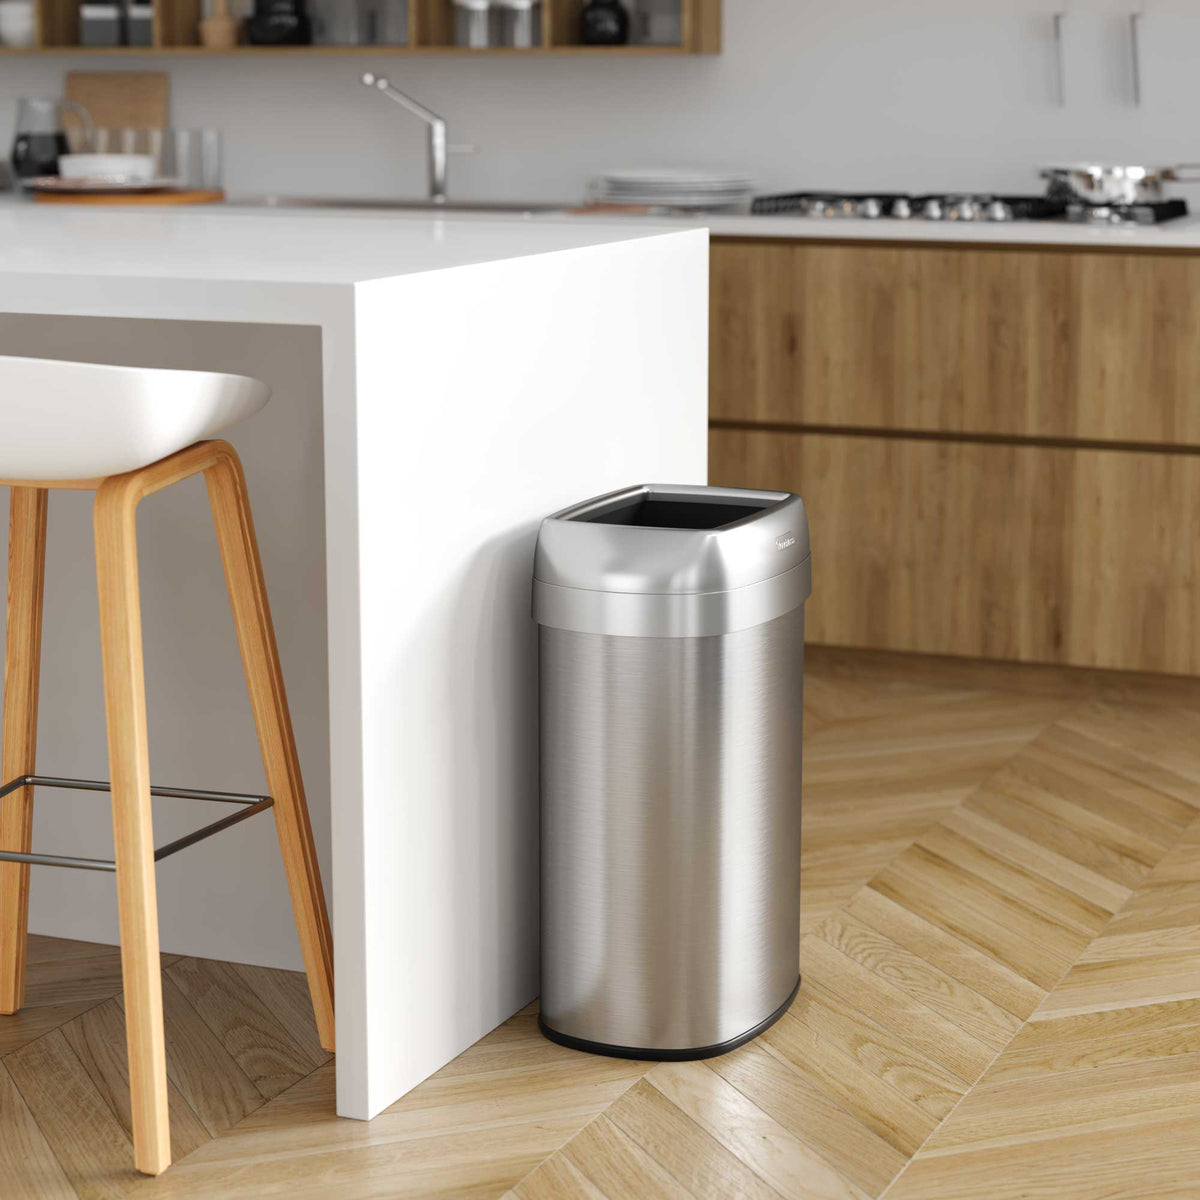 13 Gallon Elliptical Open Top Trash Can in kitchen